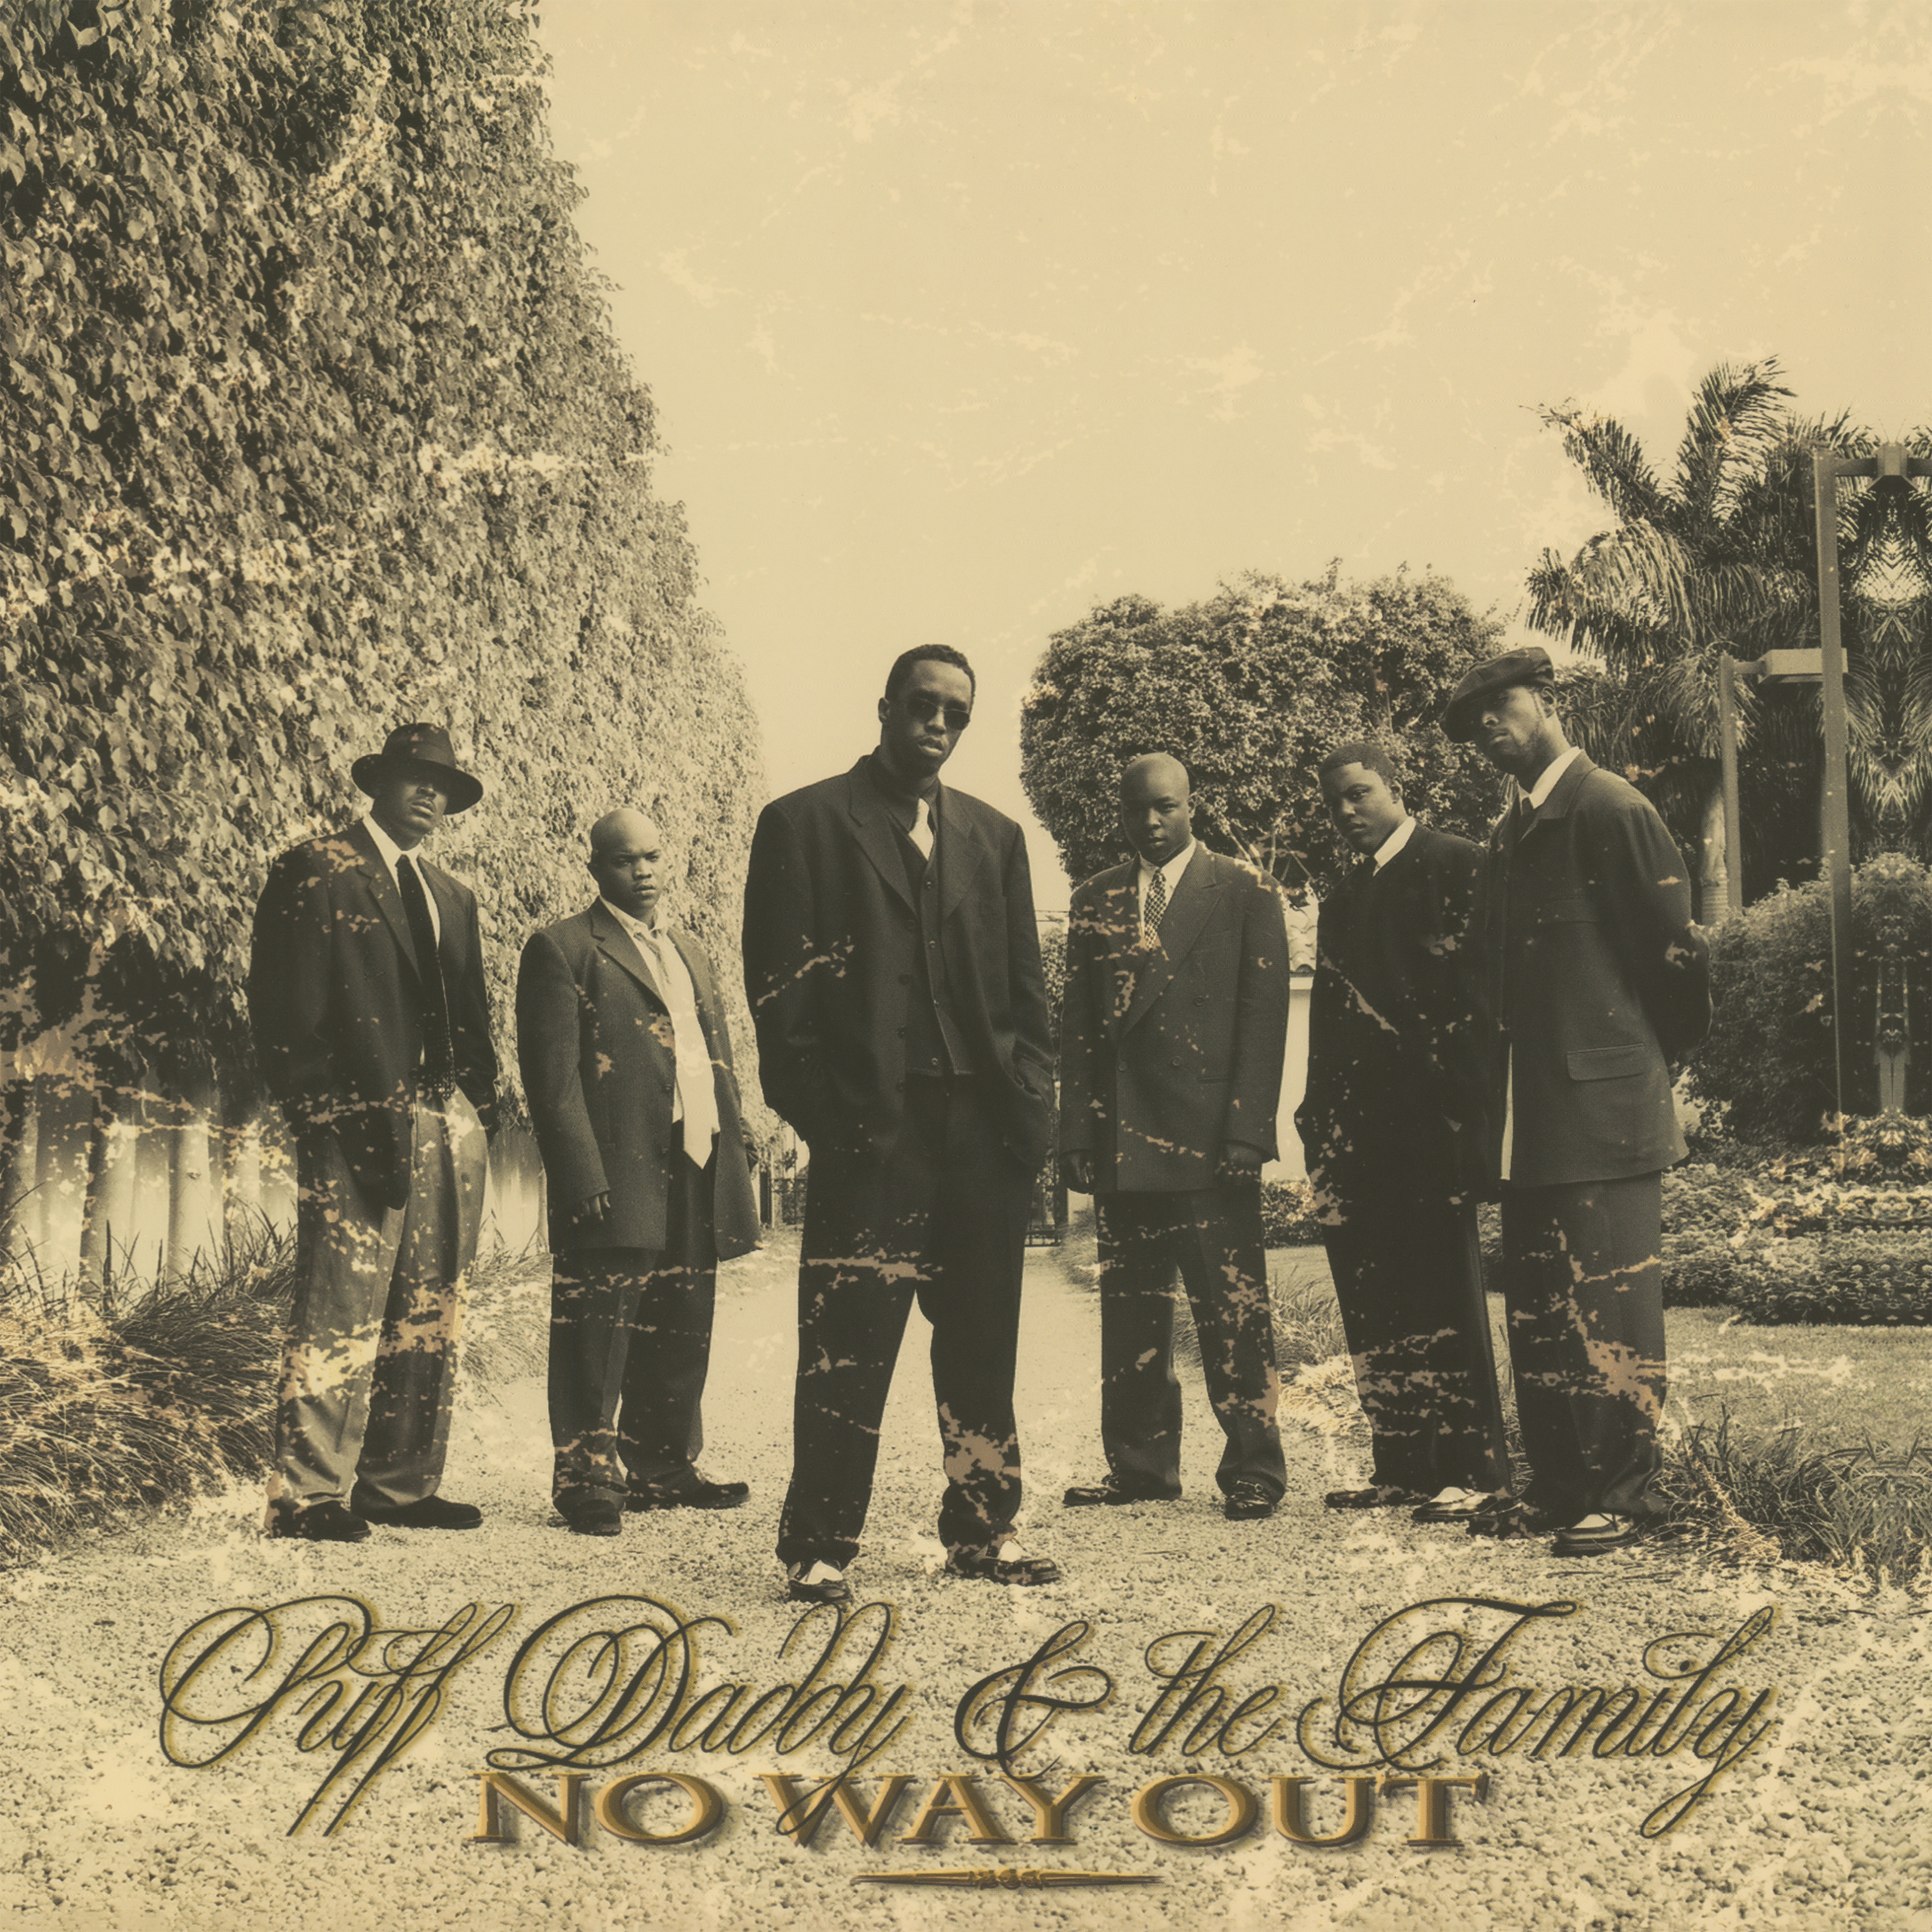 Album artwork for Album artwork for No Way Out by Puff Daddy and The Family by No Way Out - Puff Daddy and The Family